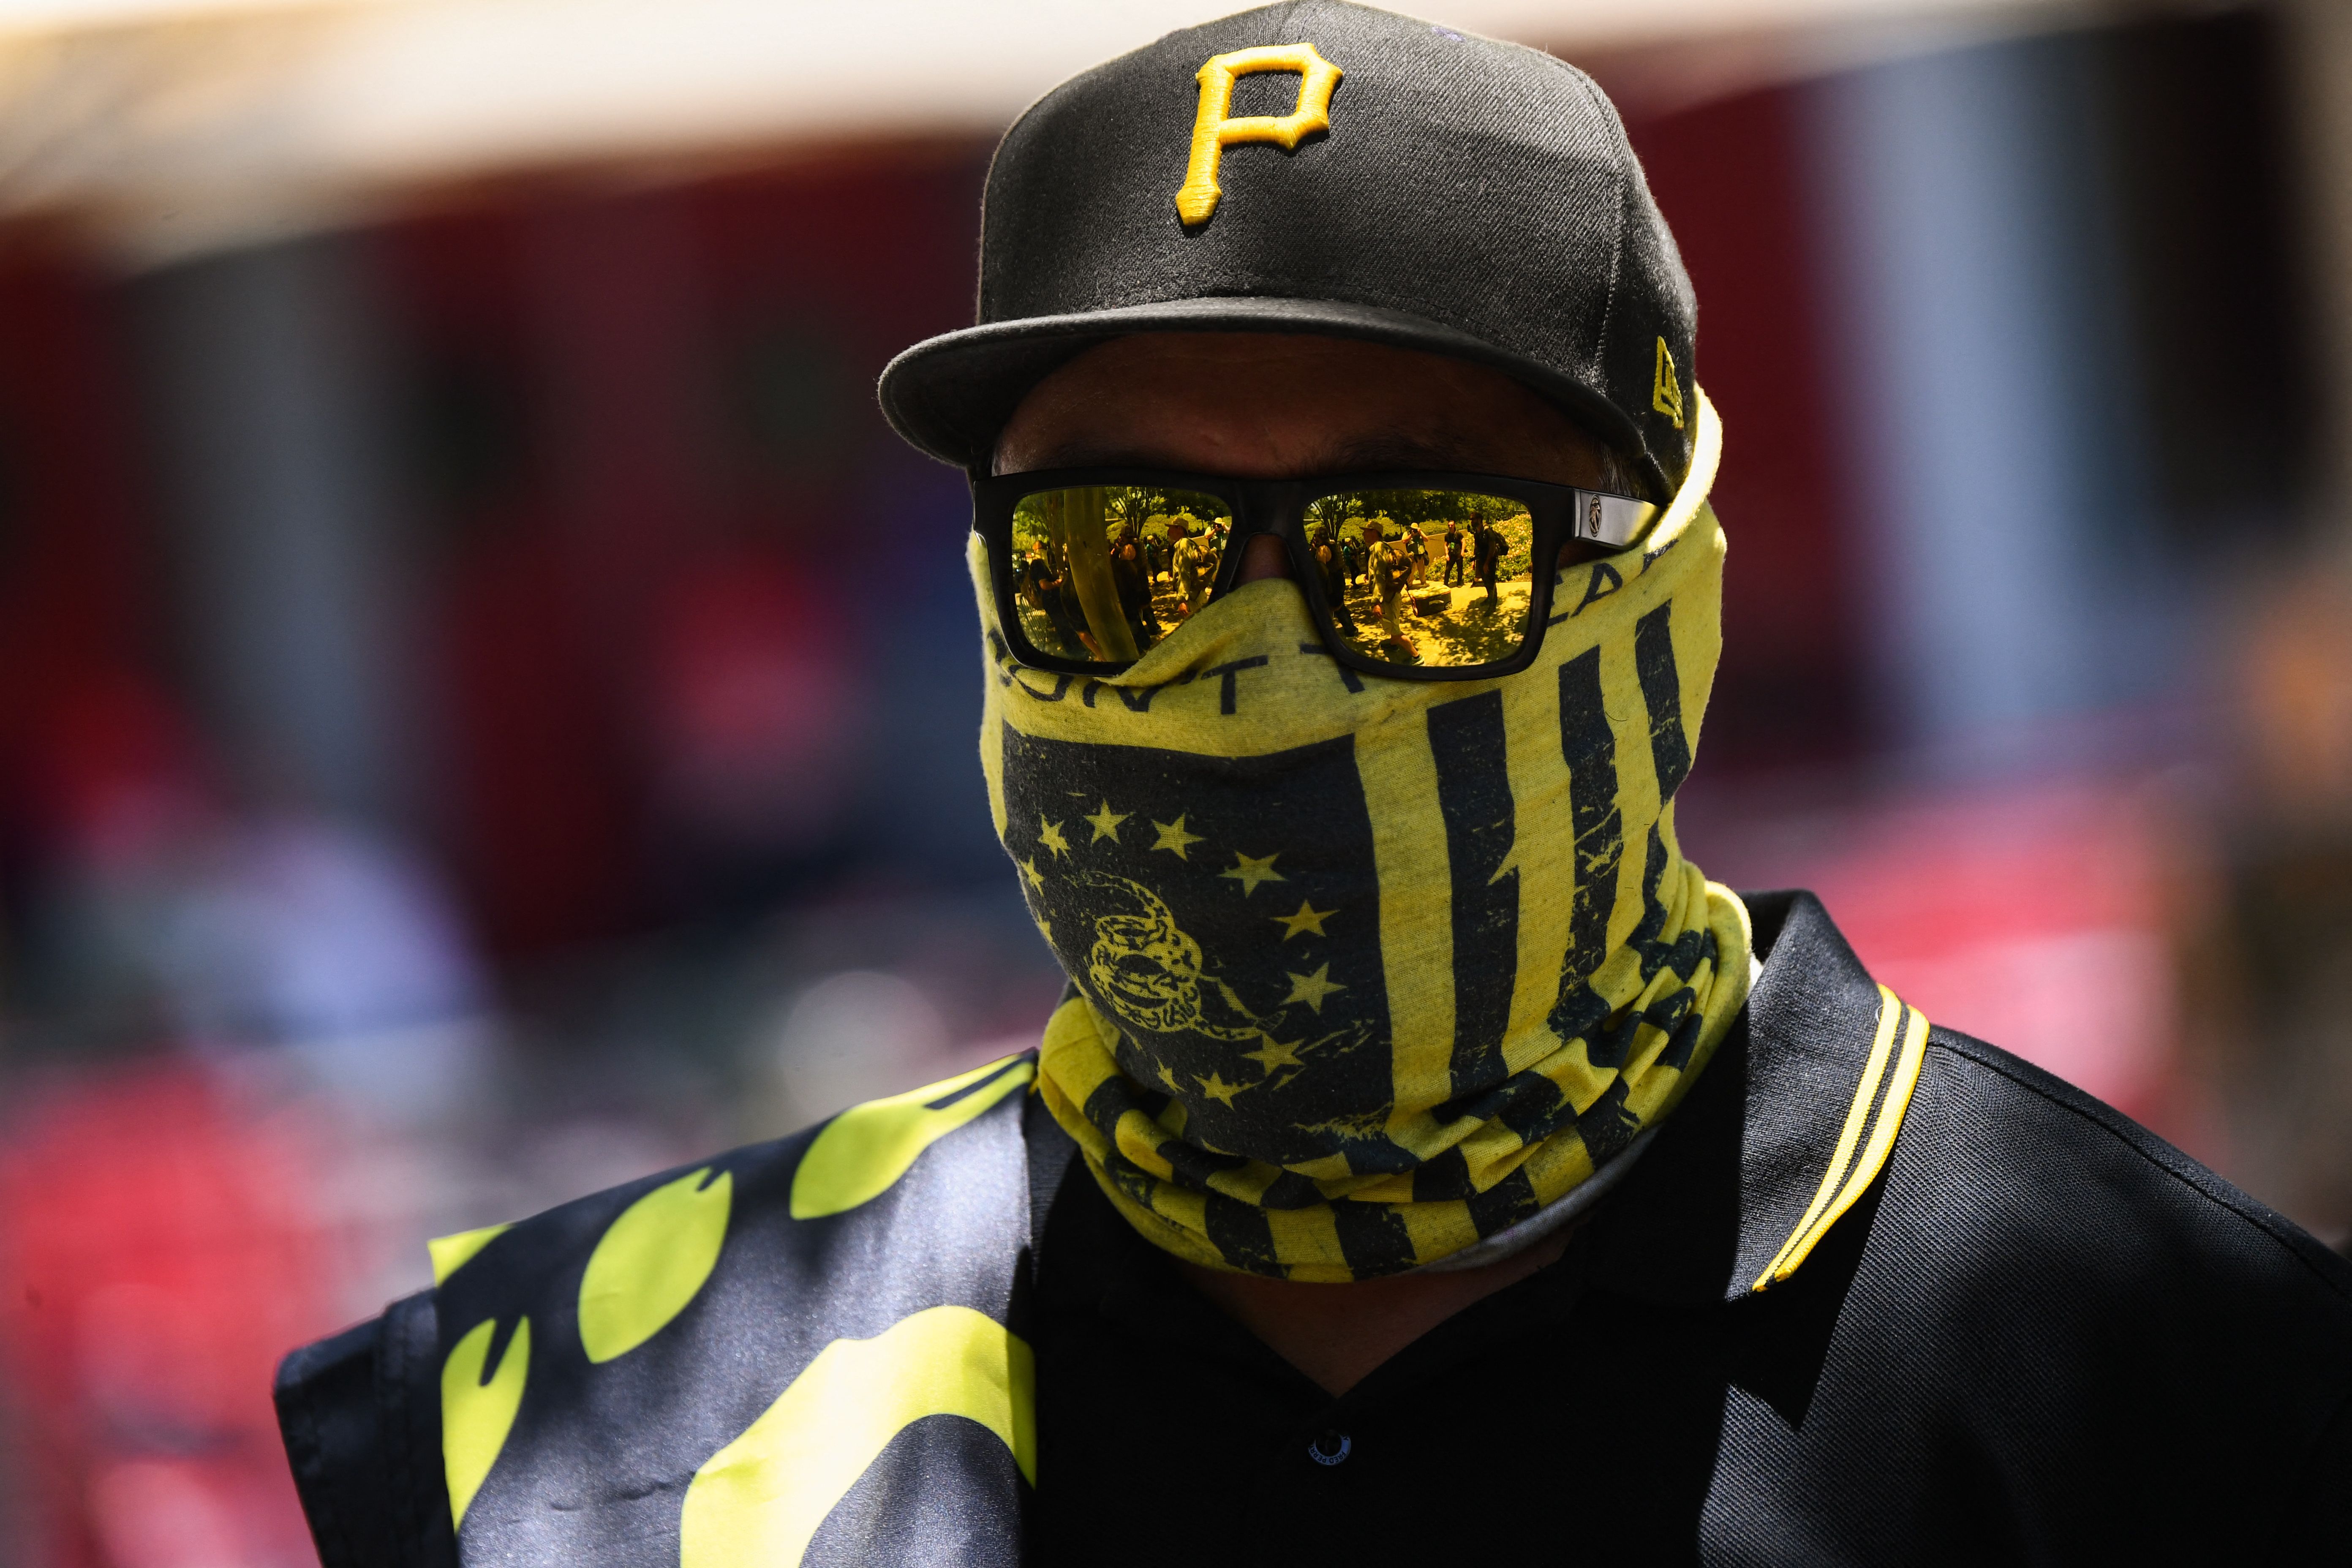 A man in a black baseball cap with a yellow “P,” a black and yellow face covering, and black and yellow reflective sunglasses.